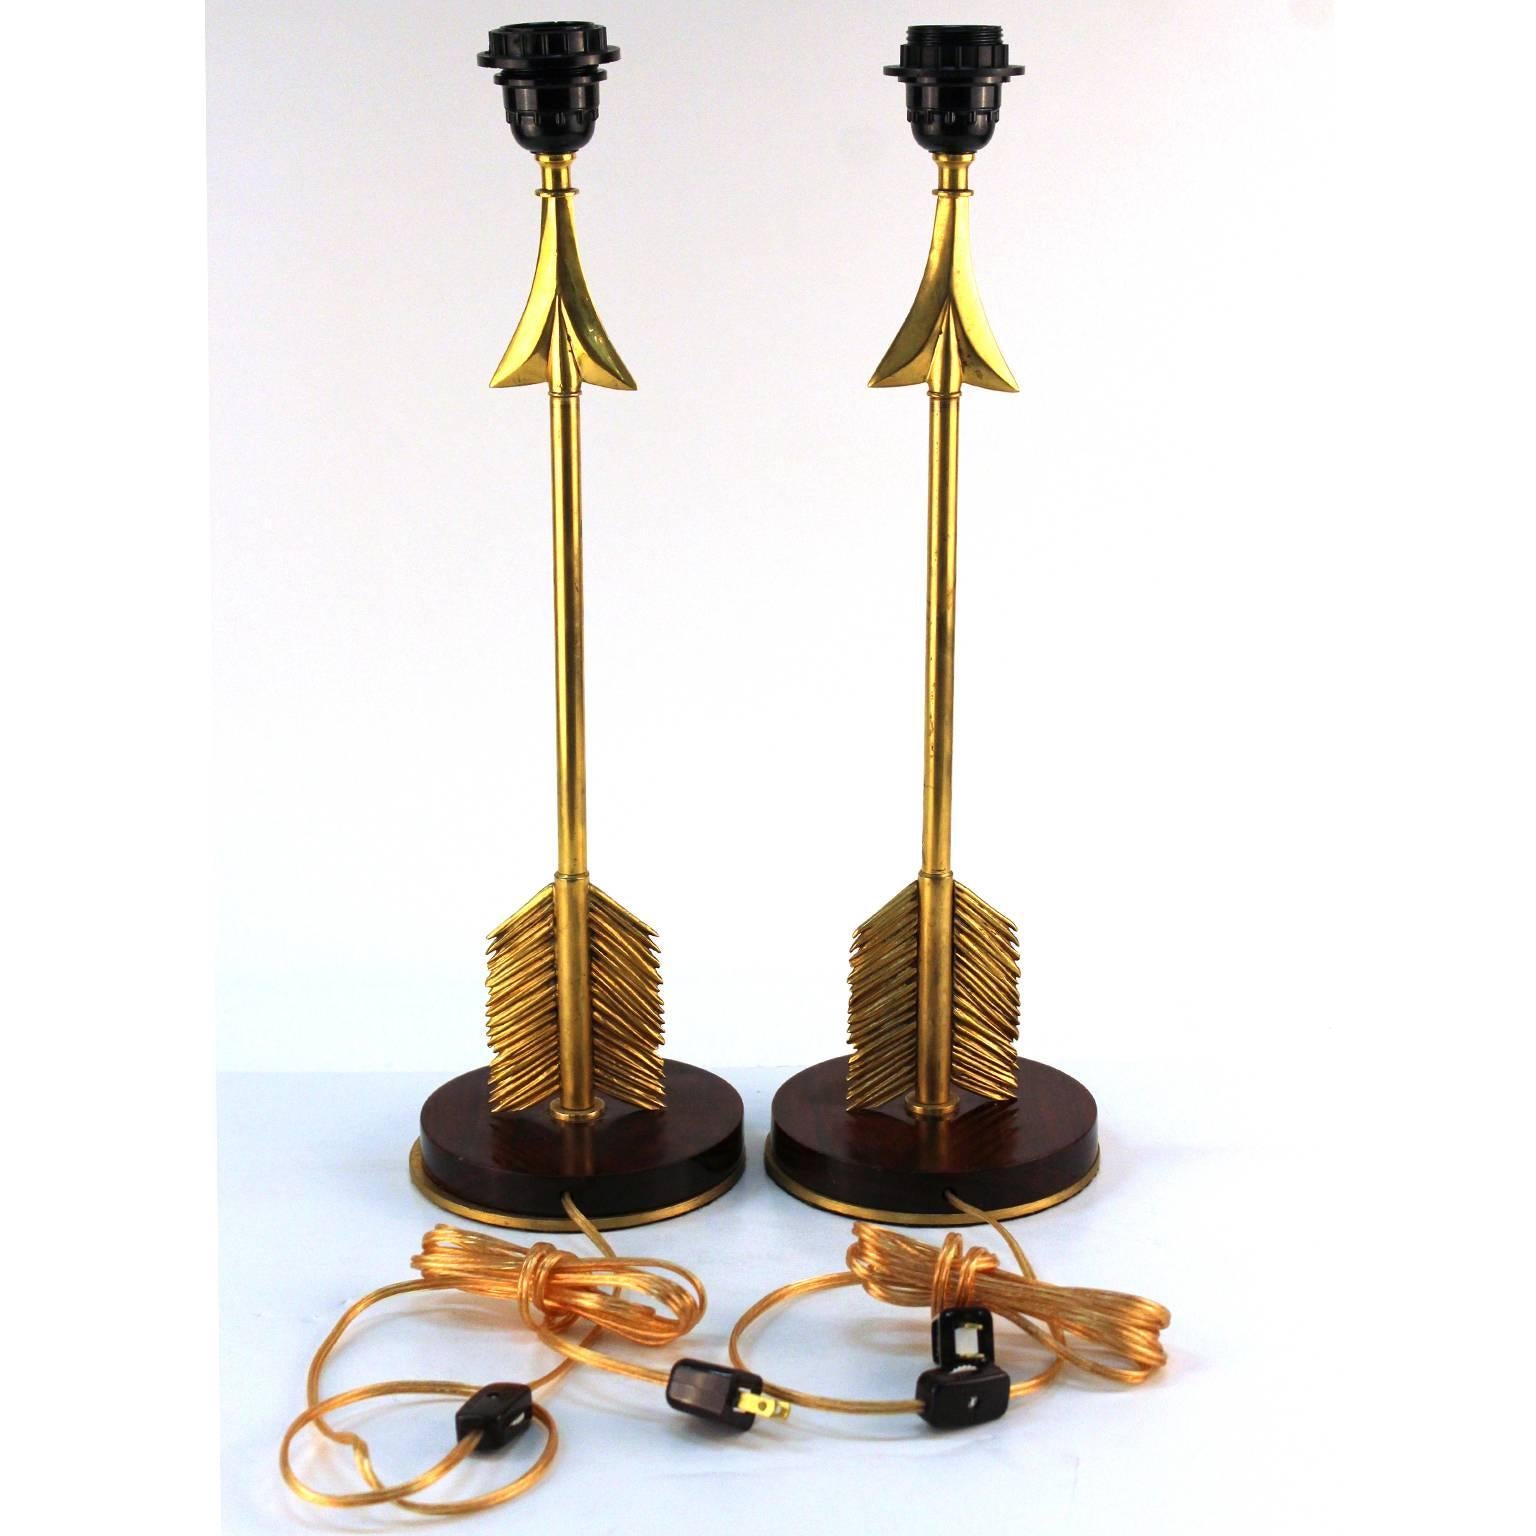 Neoclassical Revival Maison Jansen Style Arrow Table Lamps in Gilded Bronze and Mahogany